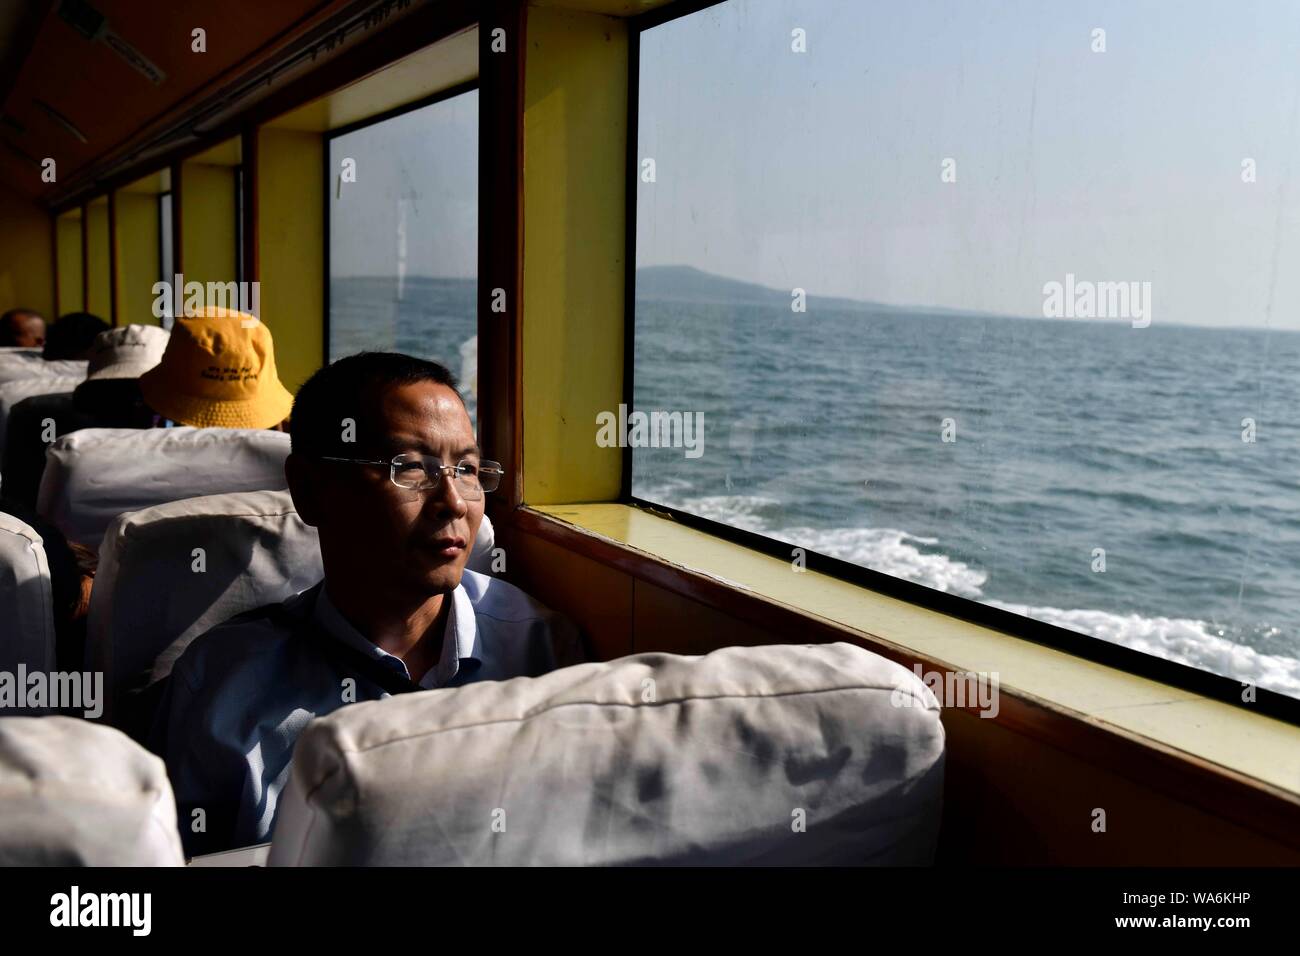 (190818) -- QINGDAO, Aug. 18, 2019 (Xinhua) -- Doctor Zhou Zhaojing takes a boat to the Lingshan Island of Qingdao, east China's Shandong Province, Aug. 16, 2019. The Lingshan Island is located some nine sea miles southeast off the west coast of Qingdao. Since 2013, the west coast new area has dispatched medical staff members to work by turns on the island. The 40-year-old Zhou was selected in 2018 as a general practitioner to work at the island's health service center. Despite harsh working and living conditions, Zhou and his colleagues never get slack at their work to provide medical service Stock Photo